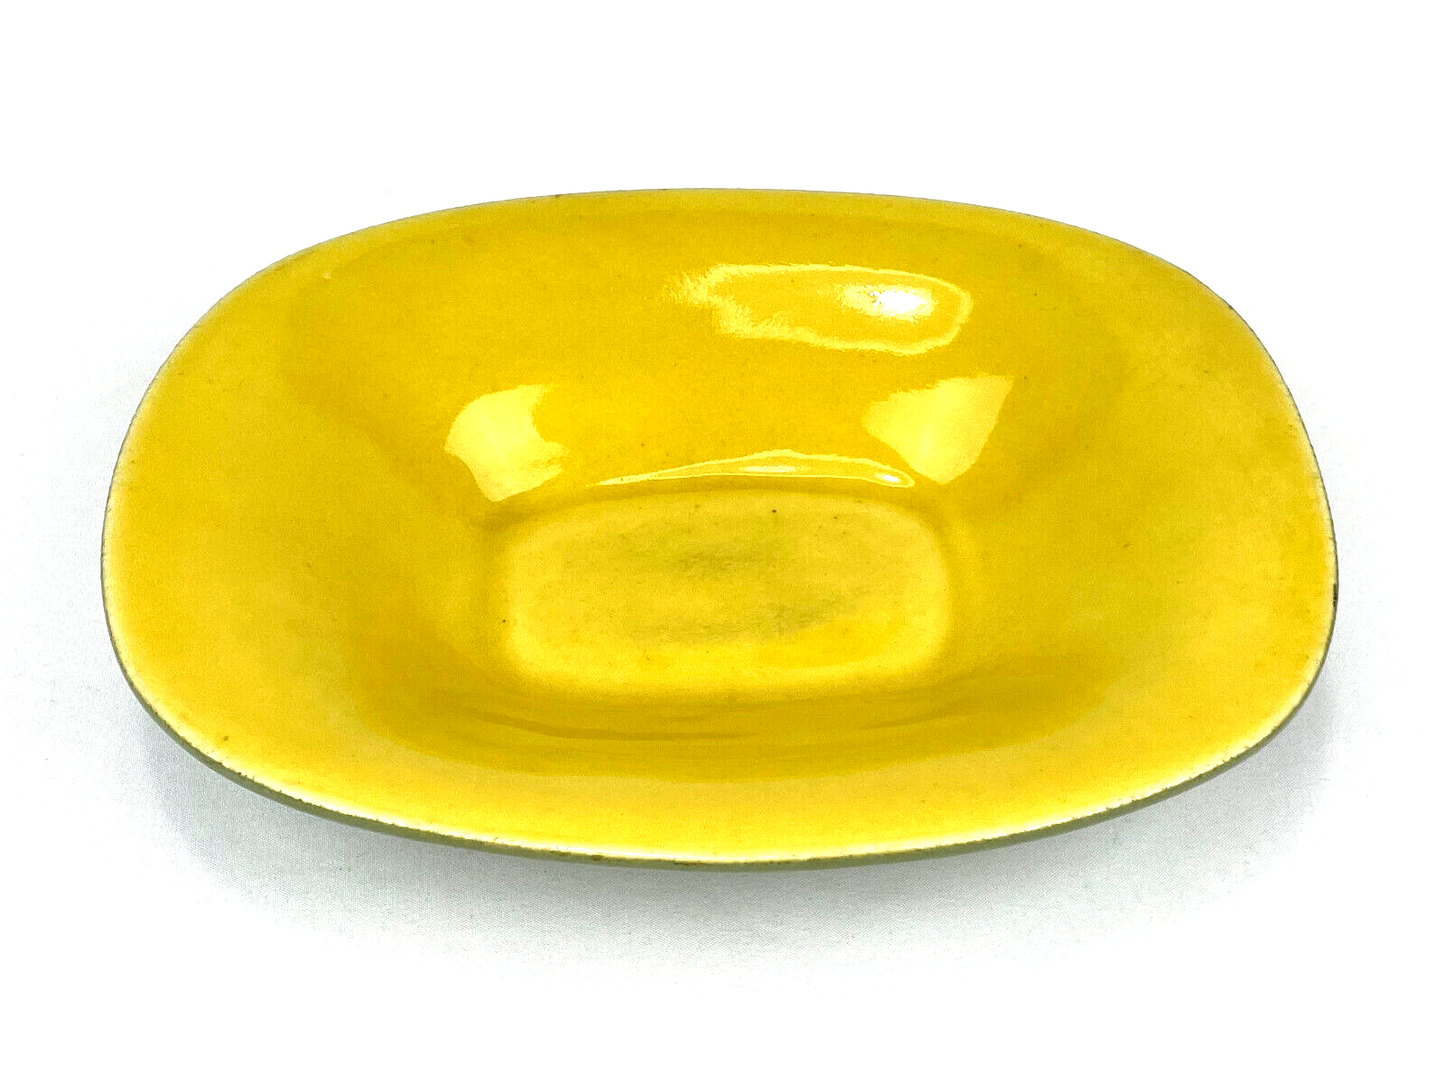 Exceptional Mid-Century Winfield Pasadena Serving Bowl